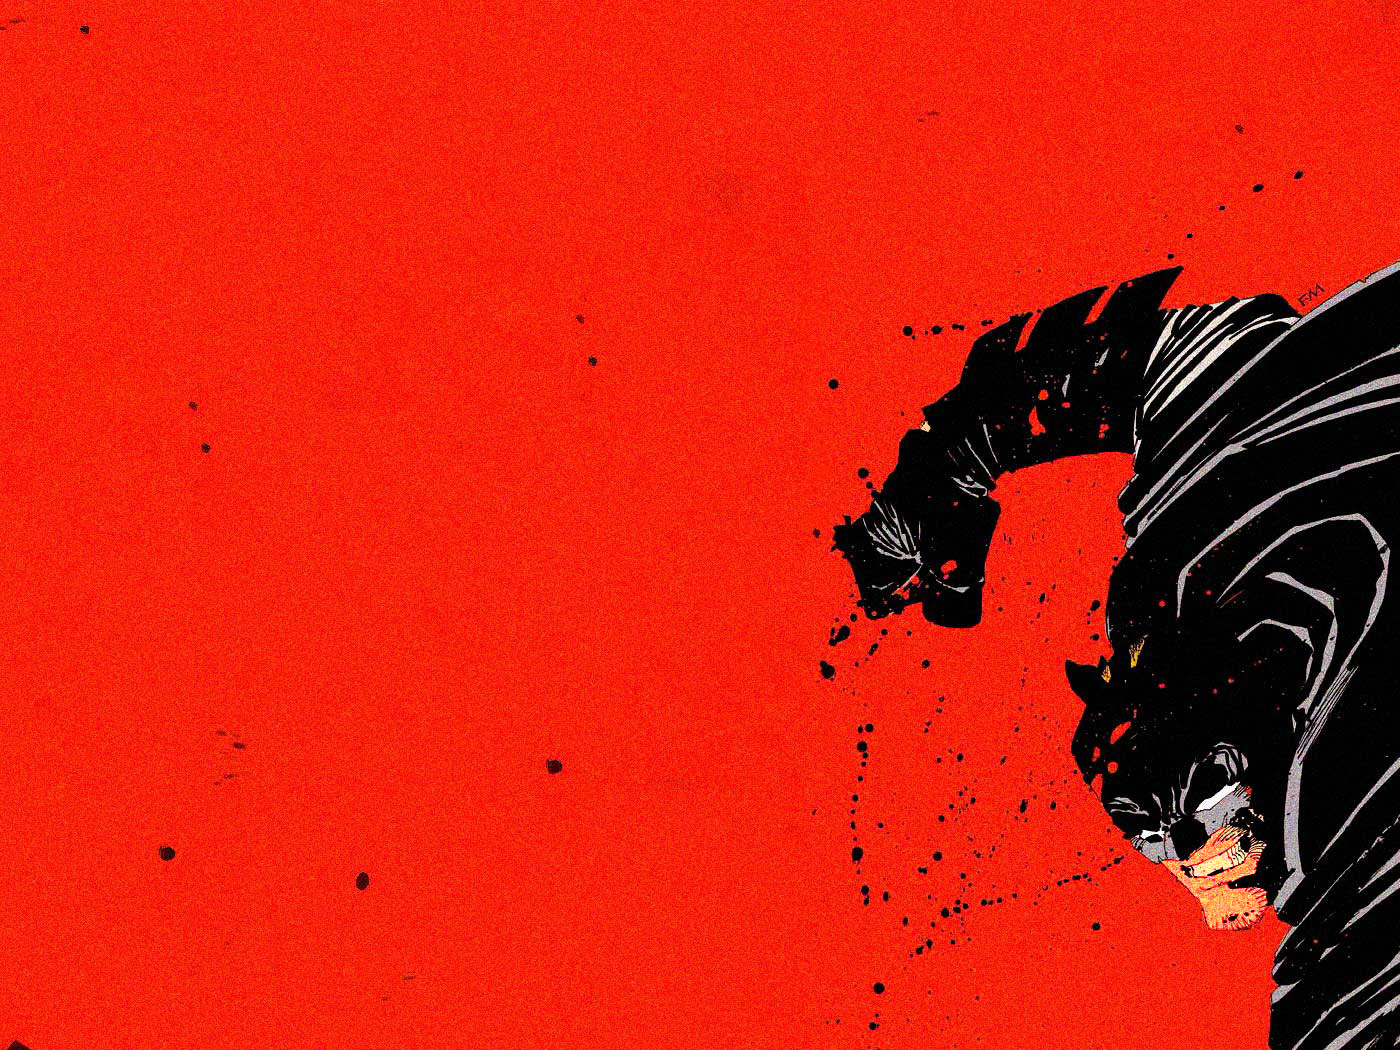 Frank Miller Wallpaper Images amp Pictures   Becuo